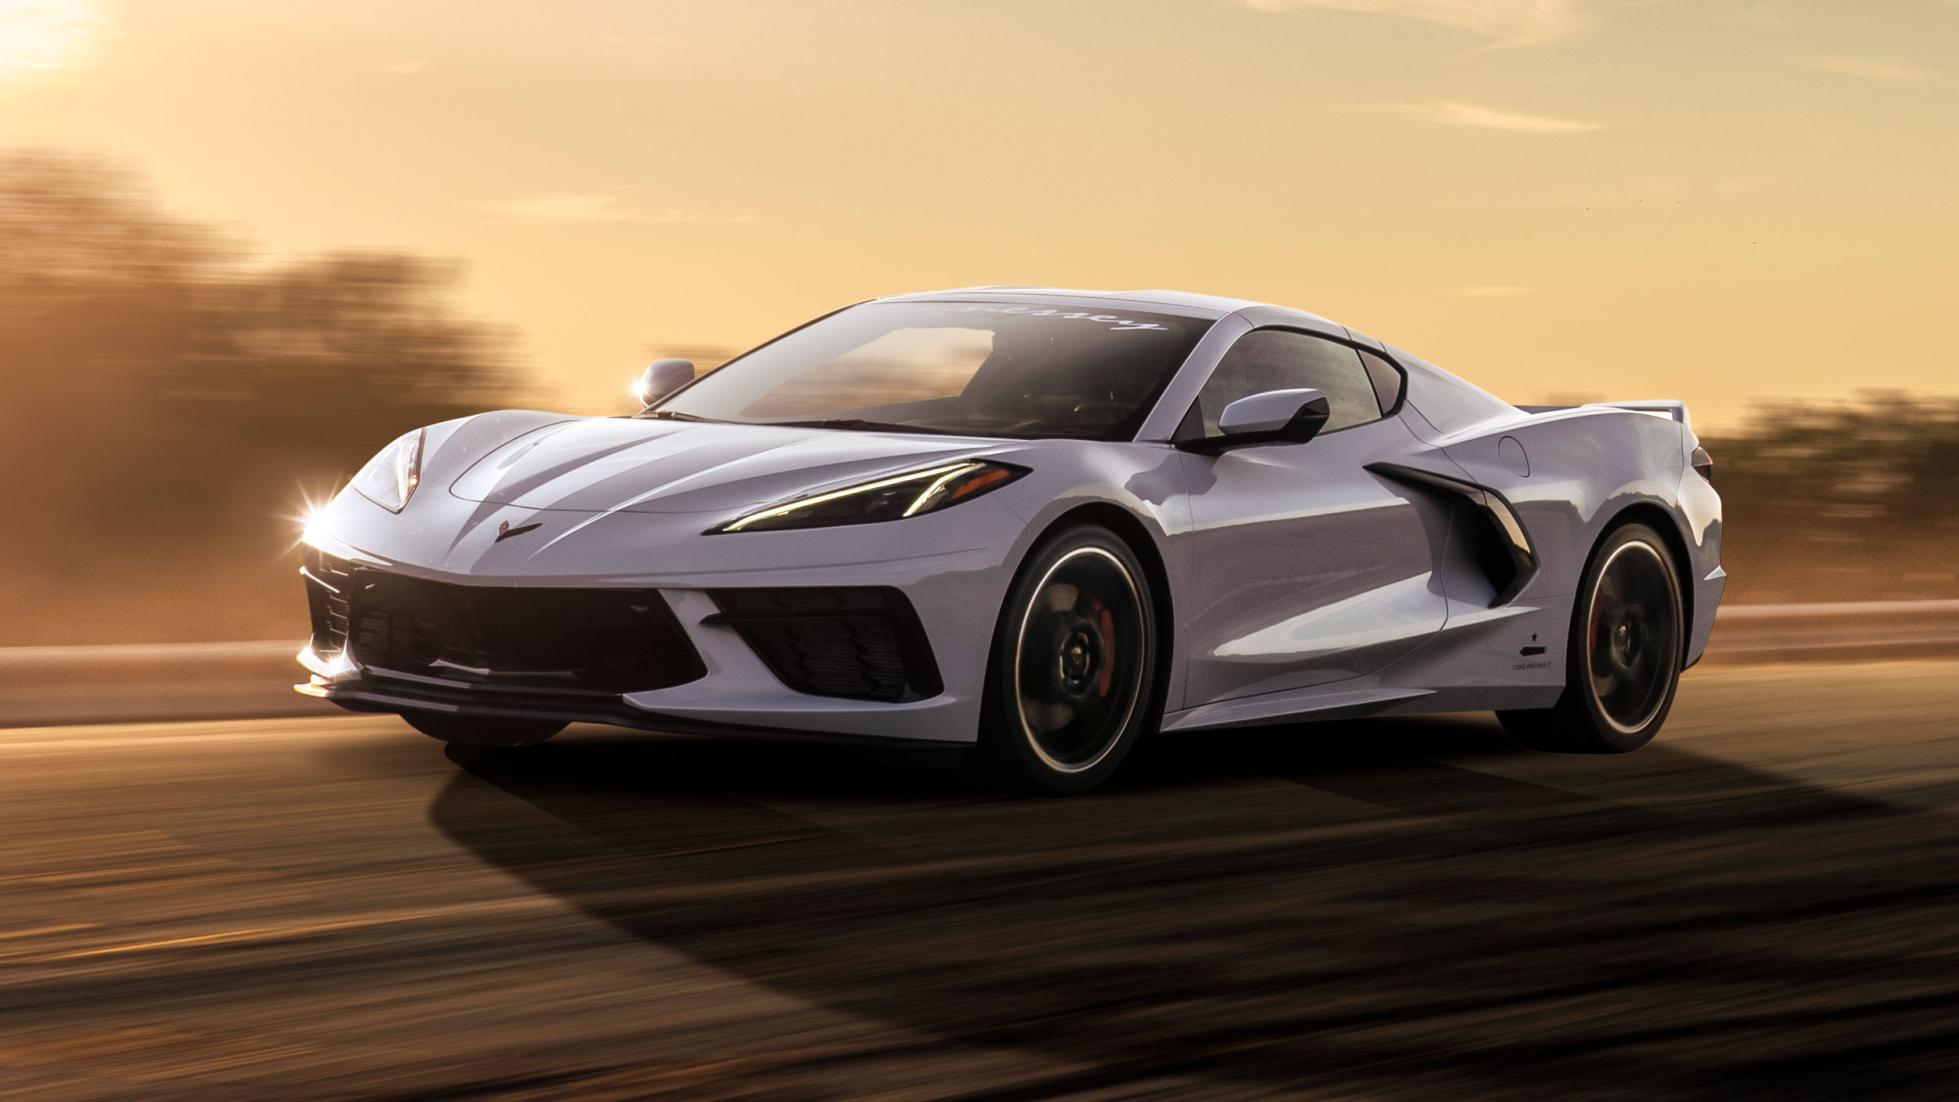 hennessey-c8-205-mph-top-speed-4